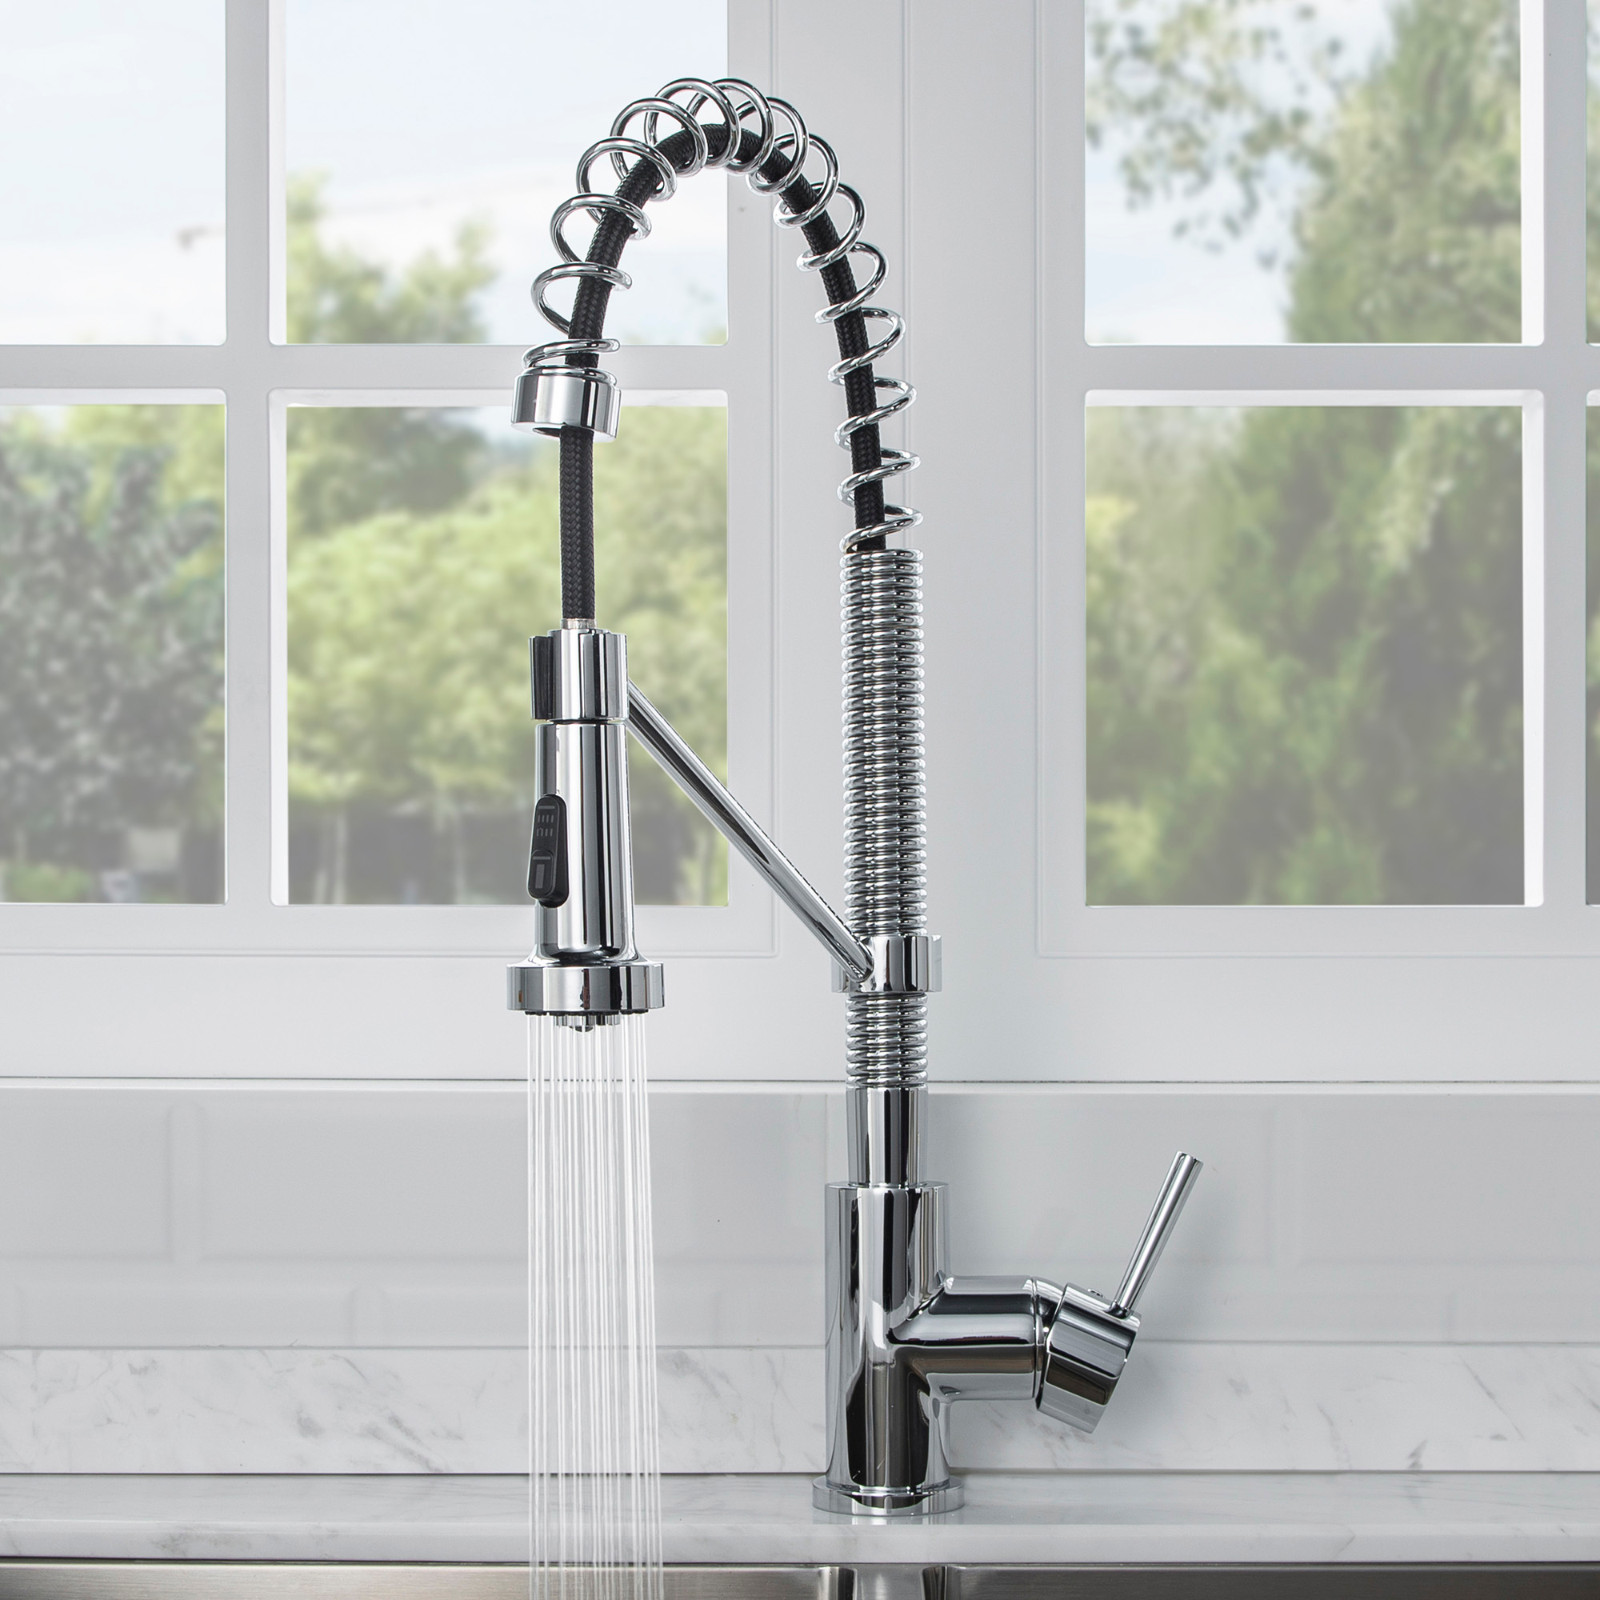  WOODBRIDGE WK010203CH Stainless Steel Single Handle Spring Coil Pre-Rinse Kitchen Faucet with Pull Down Sprayer, Chrome Finish_9453